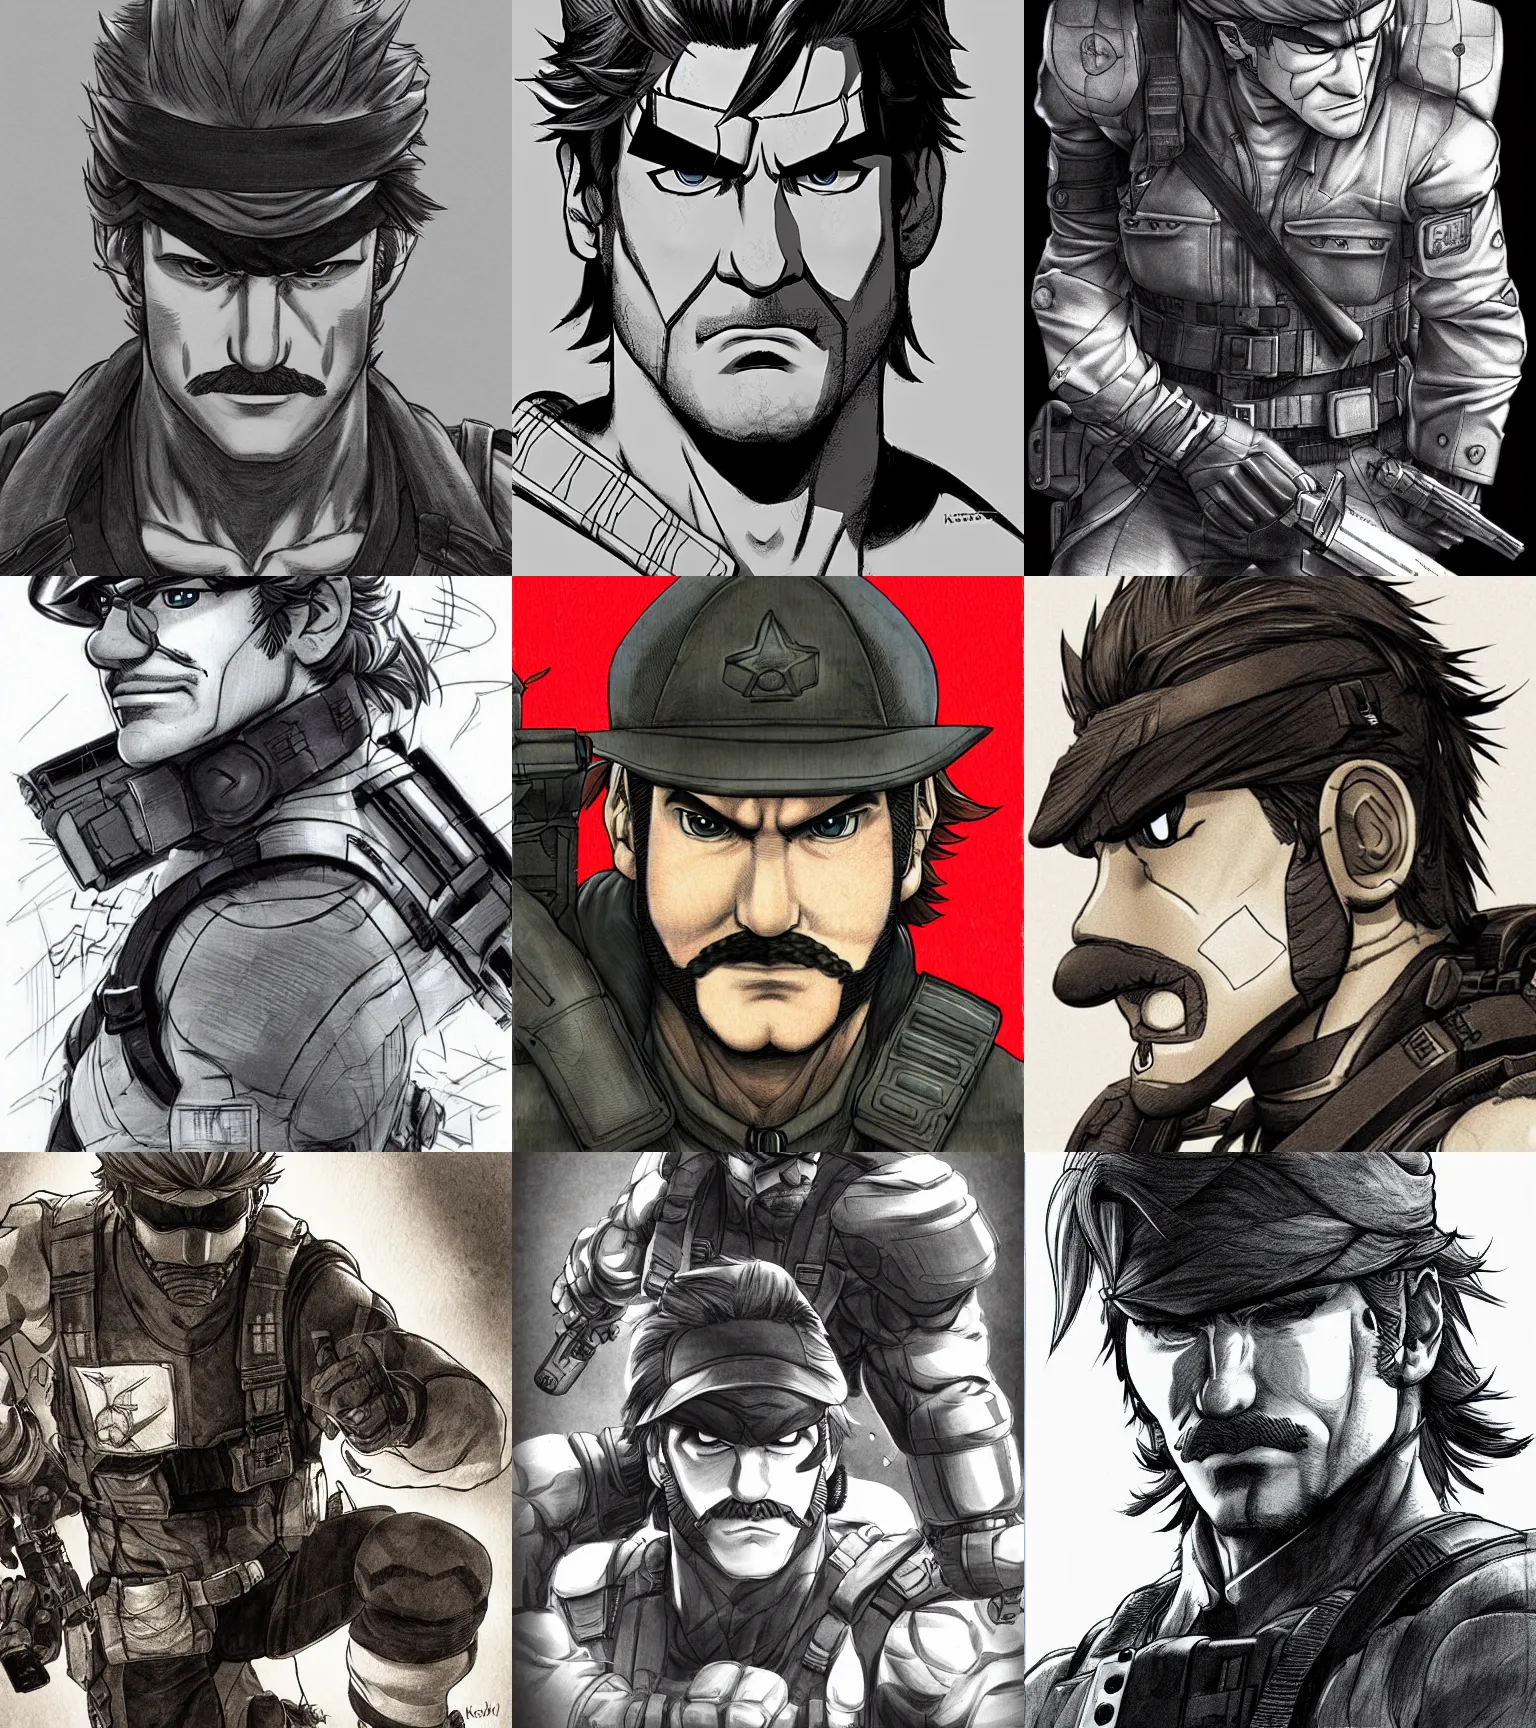 Prompt: portrait solid snake mario by yusuke murata and masakazu katsura, artstation, highly - detailed, cgsociety, pencile and ink, city in the background, dark colors, intricate details